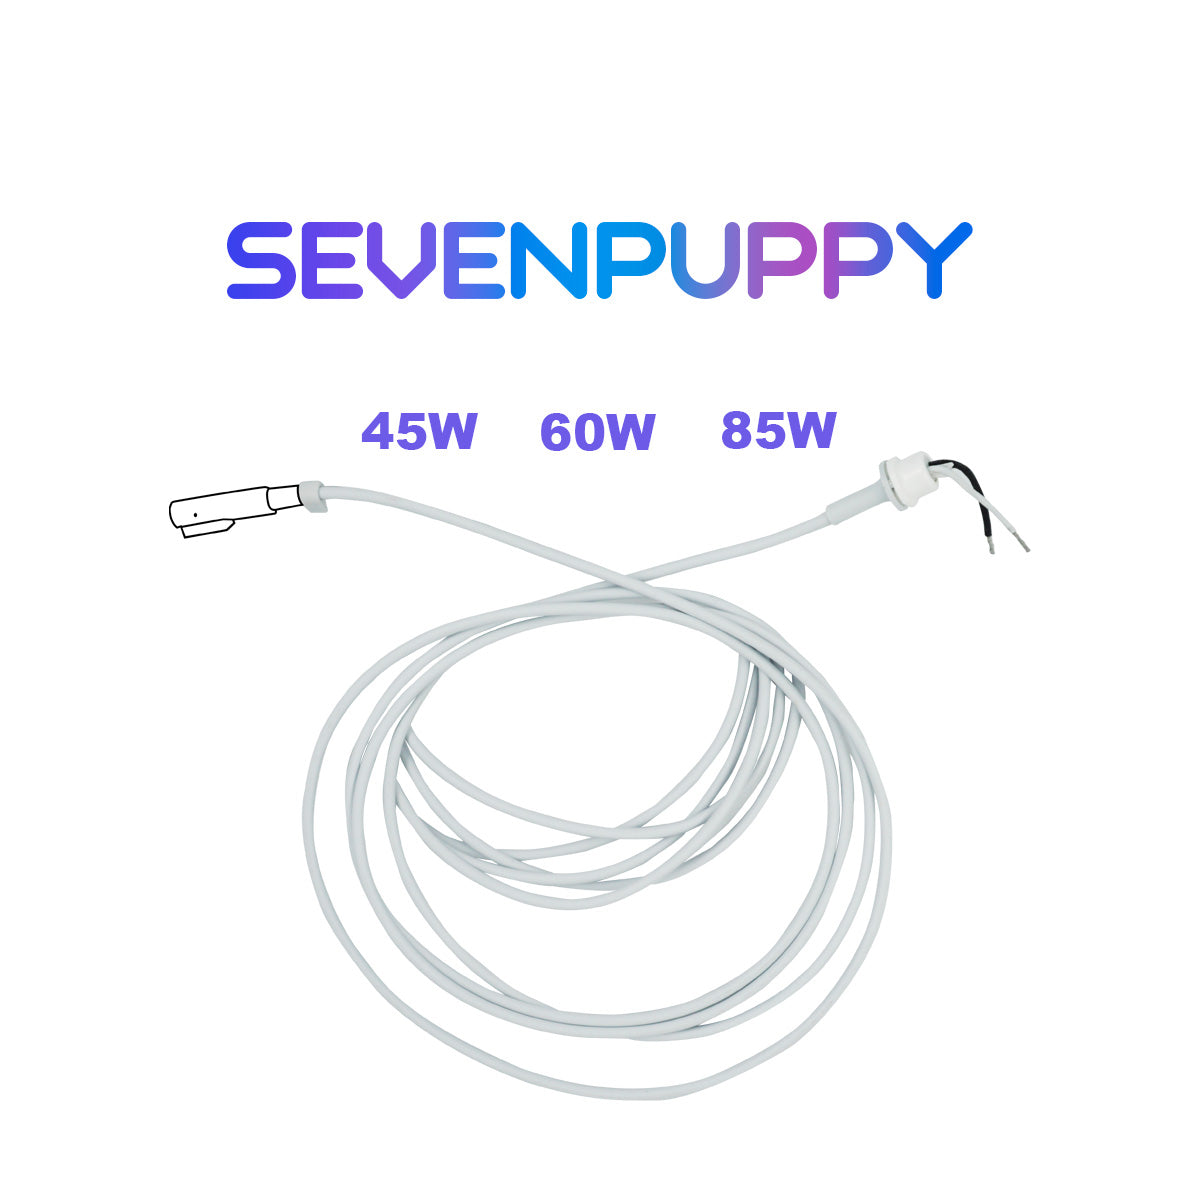 SEVEN PUPPY Brand NEW For Macbook Air / Pro A1181 A1342 A1278 A1286 A1297 A1370 A1369 Magsafe 1 45W 60W 85W Repair Charger DC Power Adapter Cable